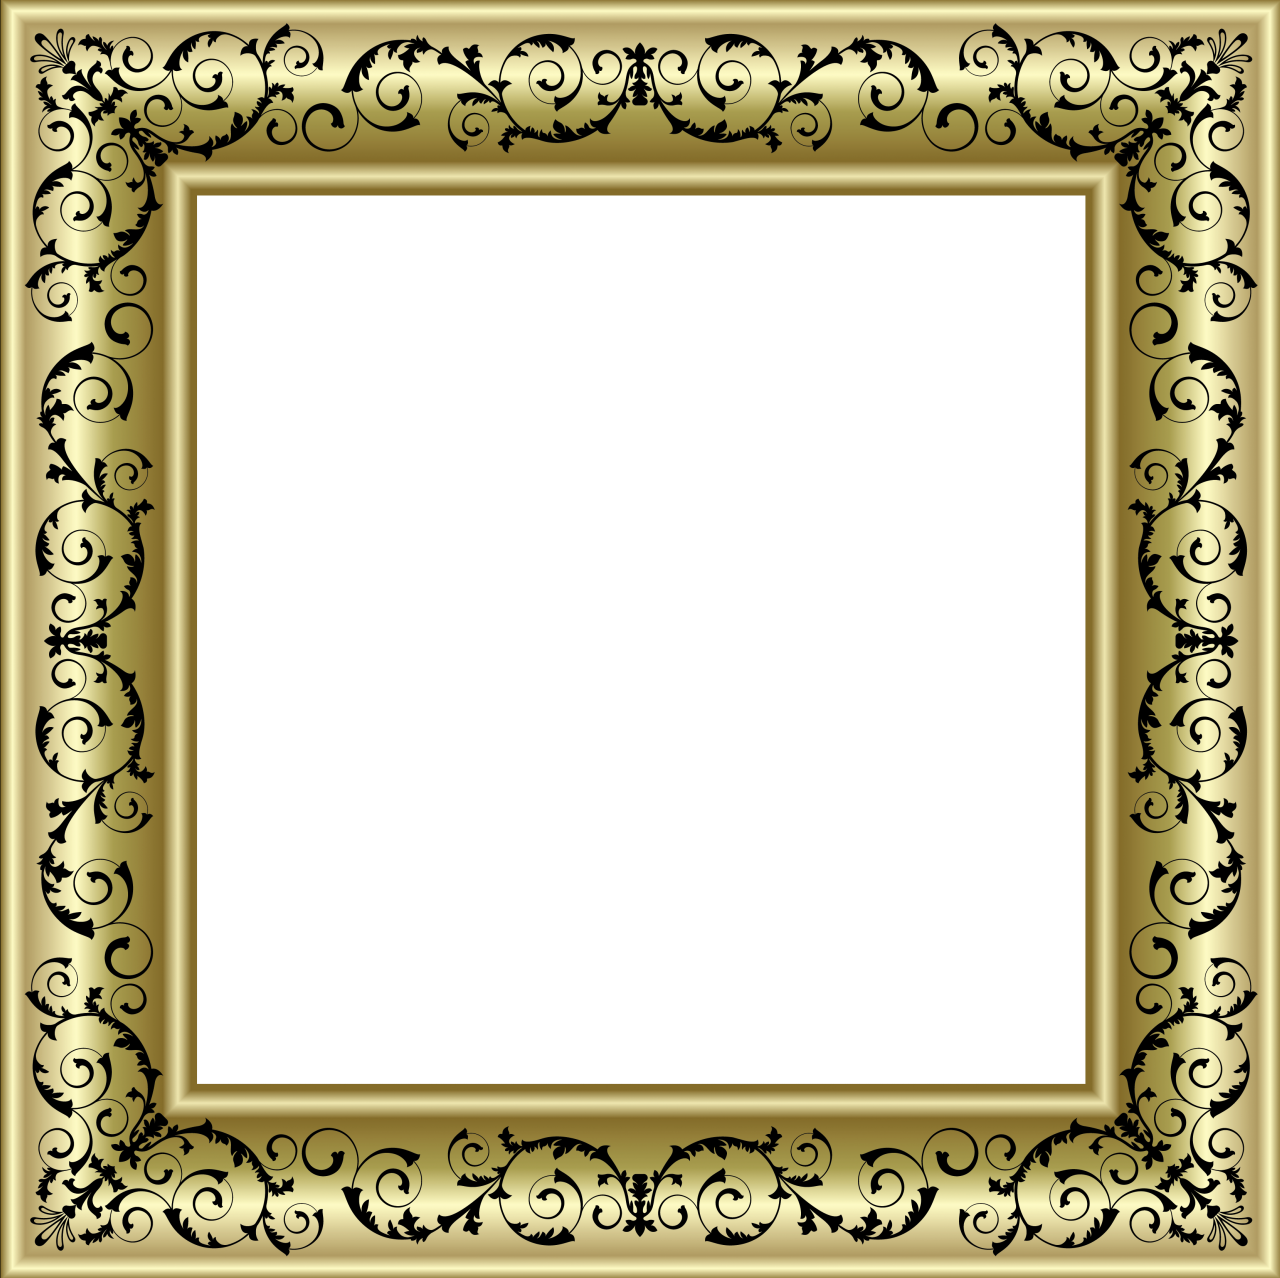 Gold Photo Frame Png With Black Ornaments High Resolution Certificate Border Clipart Large Size Png Image Pikpng